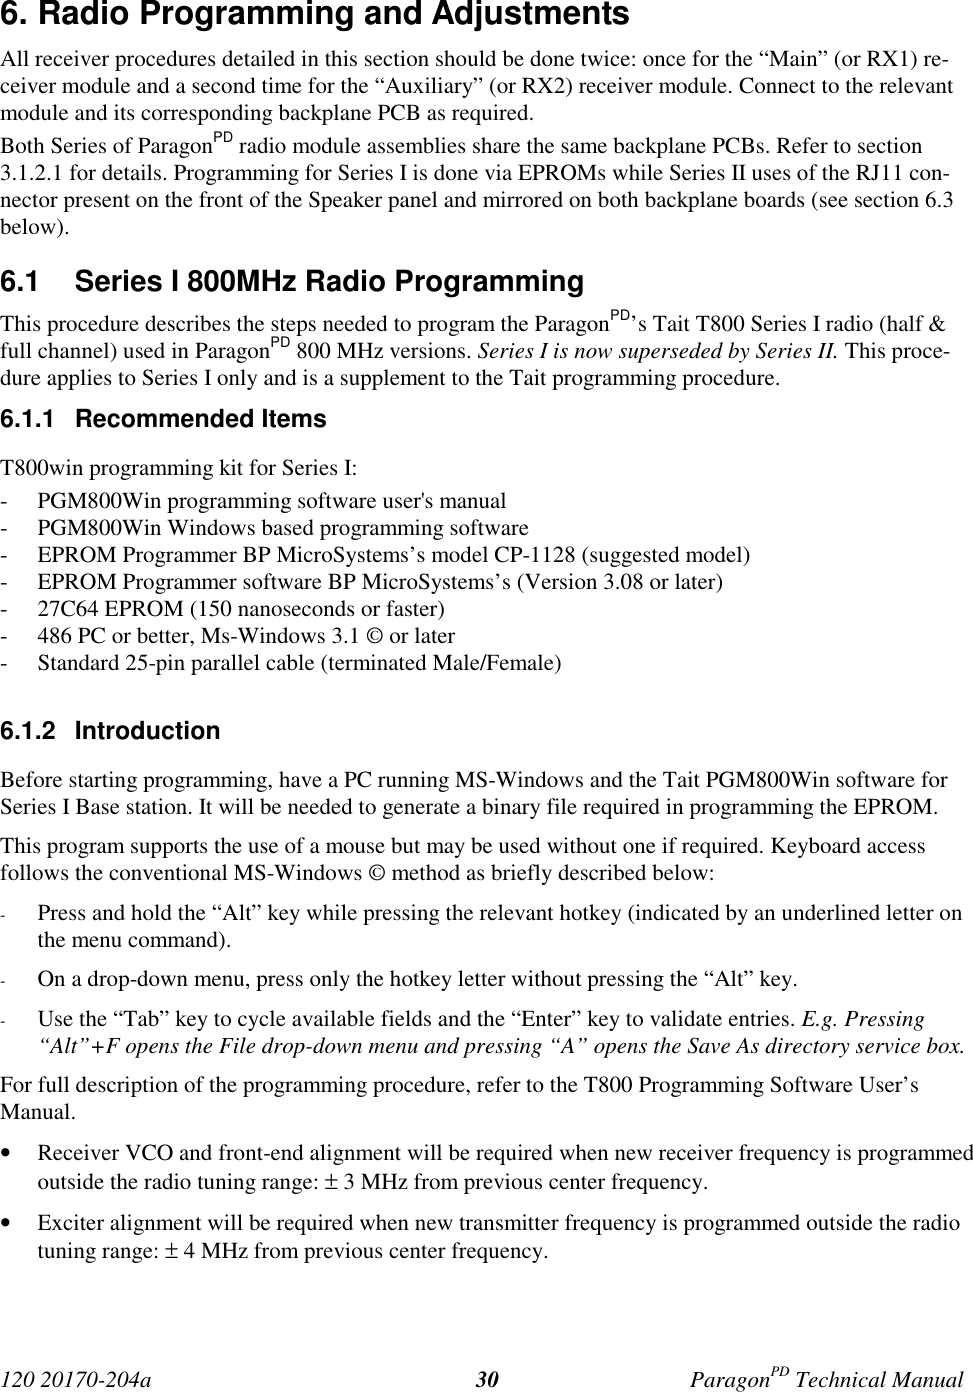 120 20170-204a ParagonPD Technical Manual306. Radio Programming and AdjustmentsAll receiver procedures detailed in this section should be done twice: once for the “Main” (or RX1) re-ceiver module and a second time for the “Auxiliary” (or RX2) receiver module. Connect to the relevantmodule and its corresponding backplane PCB as required.Both Series of ParagonPD radio module assemblies share the same backplane PCBs. Refer to section3.1.2.1 for details. Programming for Series I is done via EPROMs while Series II uses of the RJ11 con-nector present on the front of the Speaker panel and mirrored on both backplane boards (see section 6.3below).6.1  Series I 800MHz Radio ProgrammingThis procedure describes the steps needed to program the ParagonPD’s Tait T800 Series I radio (half &amp;full channel) used in ParagonPD 800 MHz versions. Series I is now superseded by Series II. This proce-dure applies to Series I only and is a supplement to the Tait programming procedure.6.1.1 Recommended ItemsT800win programming kit for Series I:- PGM800Win programming software user&apos;s manual- PGM800Win Windows based programming software- EPROM Programmer BP MicroSystems’s model CP-1128 (suggested model)- EPROM Programmer software BP MicroSystems’s (Version 3.08 or later)- 27C64 EPROM (150 nanoseconds or faster)- 486 PC or better, Ms-Windows 3.1 © or later- Standard 25-pin parallel cable (terminated Male/Female)6.1.2 IntroductionBefore starting programming, have a PC running MS-Windows and the Tait PGM800Win software forSeries I Base station. It will be needed to generate a binary file required in programming the EPROM.This program supports the use of a mouse but may be used without one if required. Keyboard accessfollows the conventional MS-Windows © method as briefly described below:- Press and hold the “Alt” key while pressing the relevant hotkey (indicated by an underlined letter onthe menu command).- On a drop-down menu, press only the hotkey letter without pressing the “Alt” key.- Use the “Tab” key to cycle available fields and the “Enter” key to validate entries. E.g. Pressing“Alt”+F opens the File drop-down menu and pressing “A” opens the Save As directory service box.For full description of the programming procedure, refer to the T800 Programming Software User’sManual.• Receiver VCO and front-end alignment will be required when new receiver frequency is programmedoutside the radio tuning range: ± 3 MHz from previous center frequency.• Exciter alignment will be required when new transmitter frequency is programmed outside the radiotuning range: ± 4 MHz from previous center frequency.